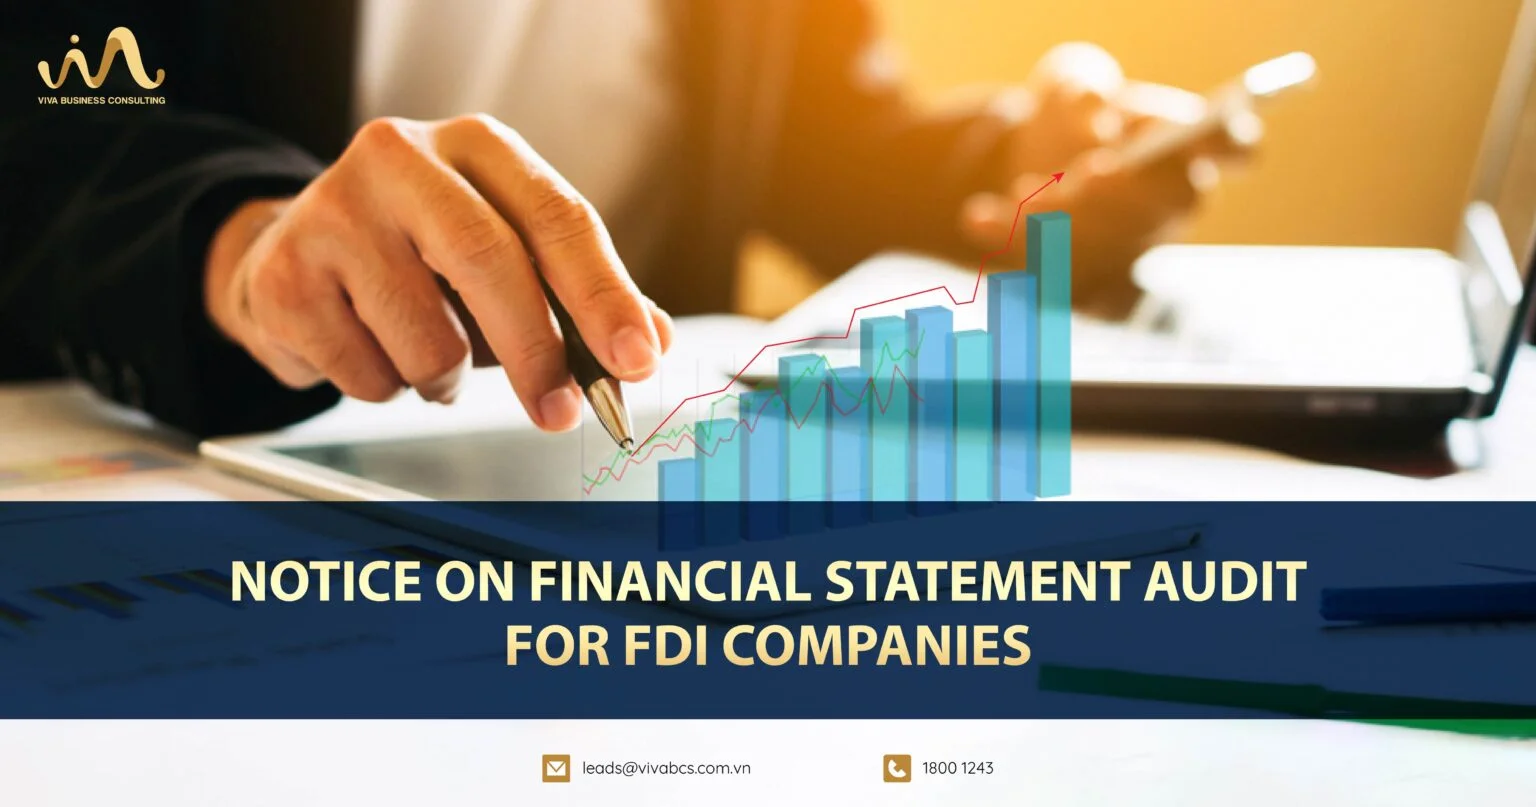 Notice on financial statement audit for FDI companies